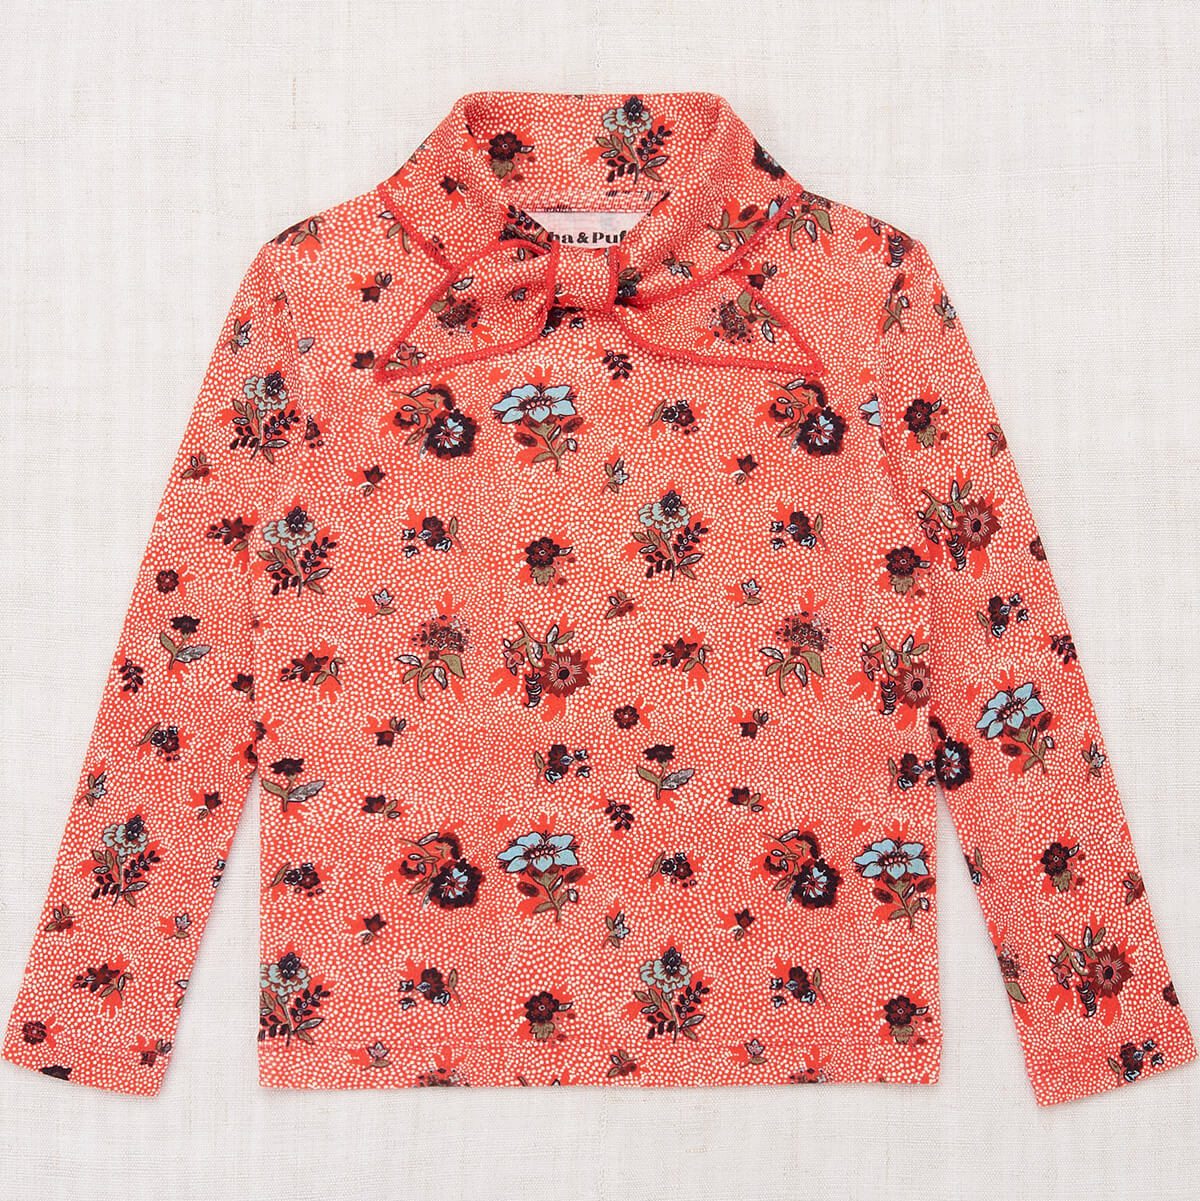 Scout Top in Red Flame Holyoke Floral by Misha & Puff – Junior Edition